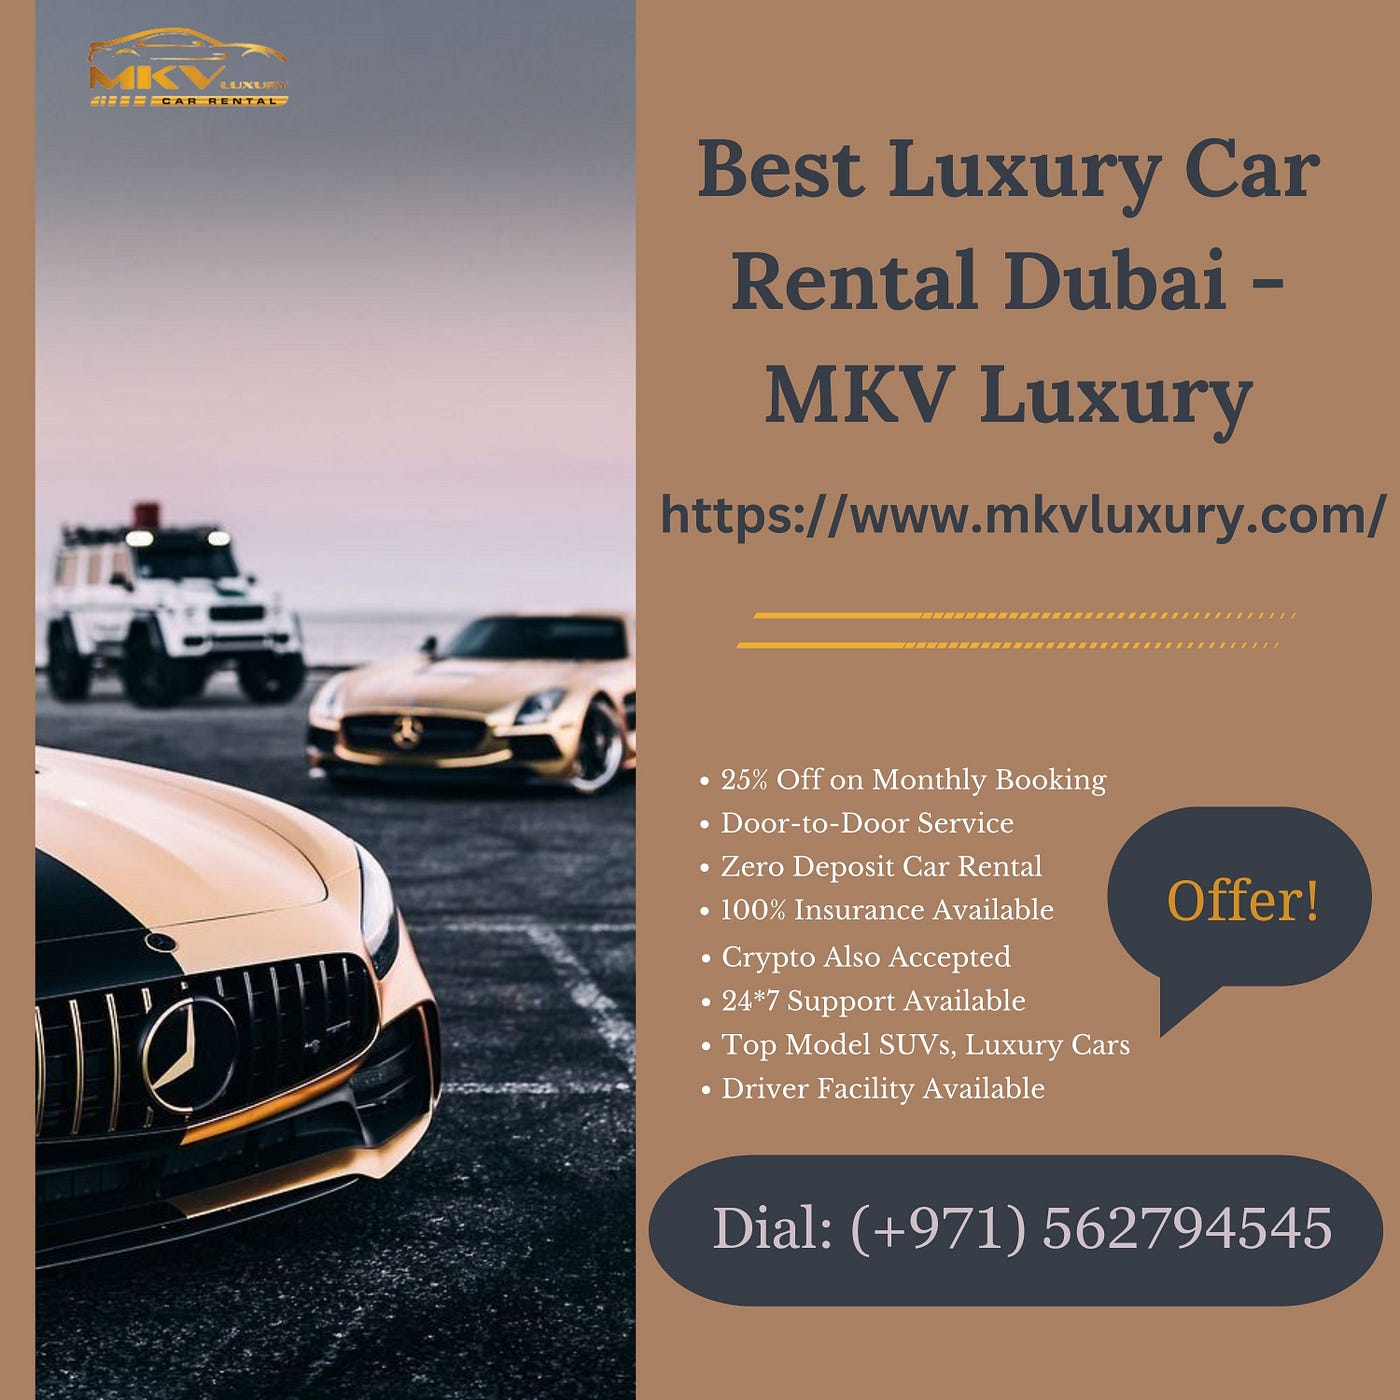 Hire the Best Luxury Car Rental Dubai For The Immense Experience | by MKV  Luxury | Medium